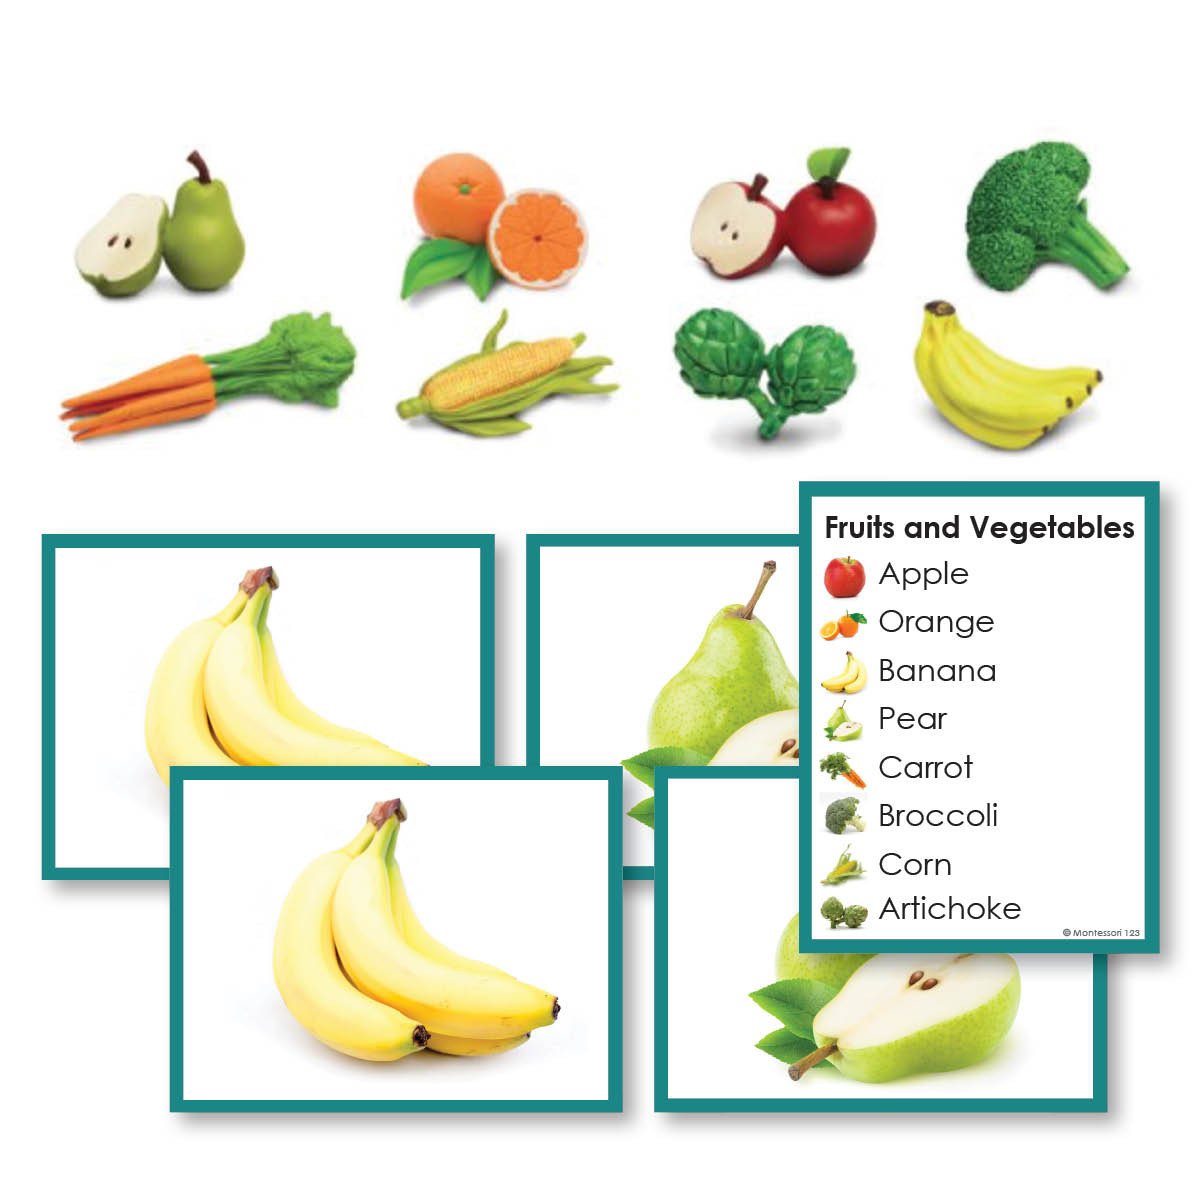 Botany-Plant Identification - Fruits And Vegetables Toddler Cards With Objects